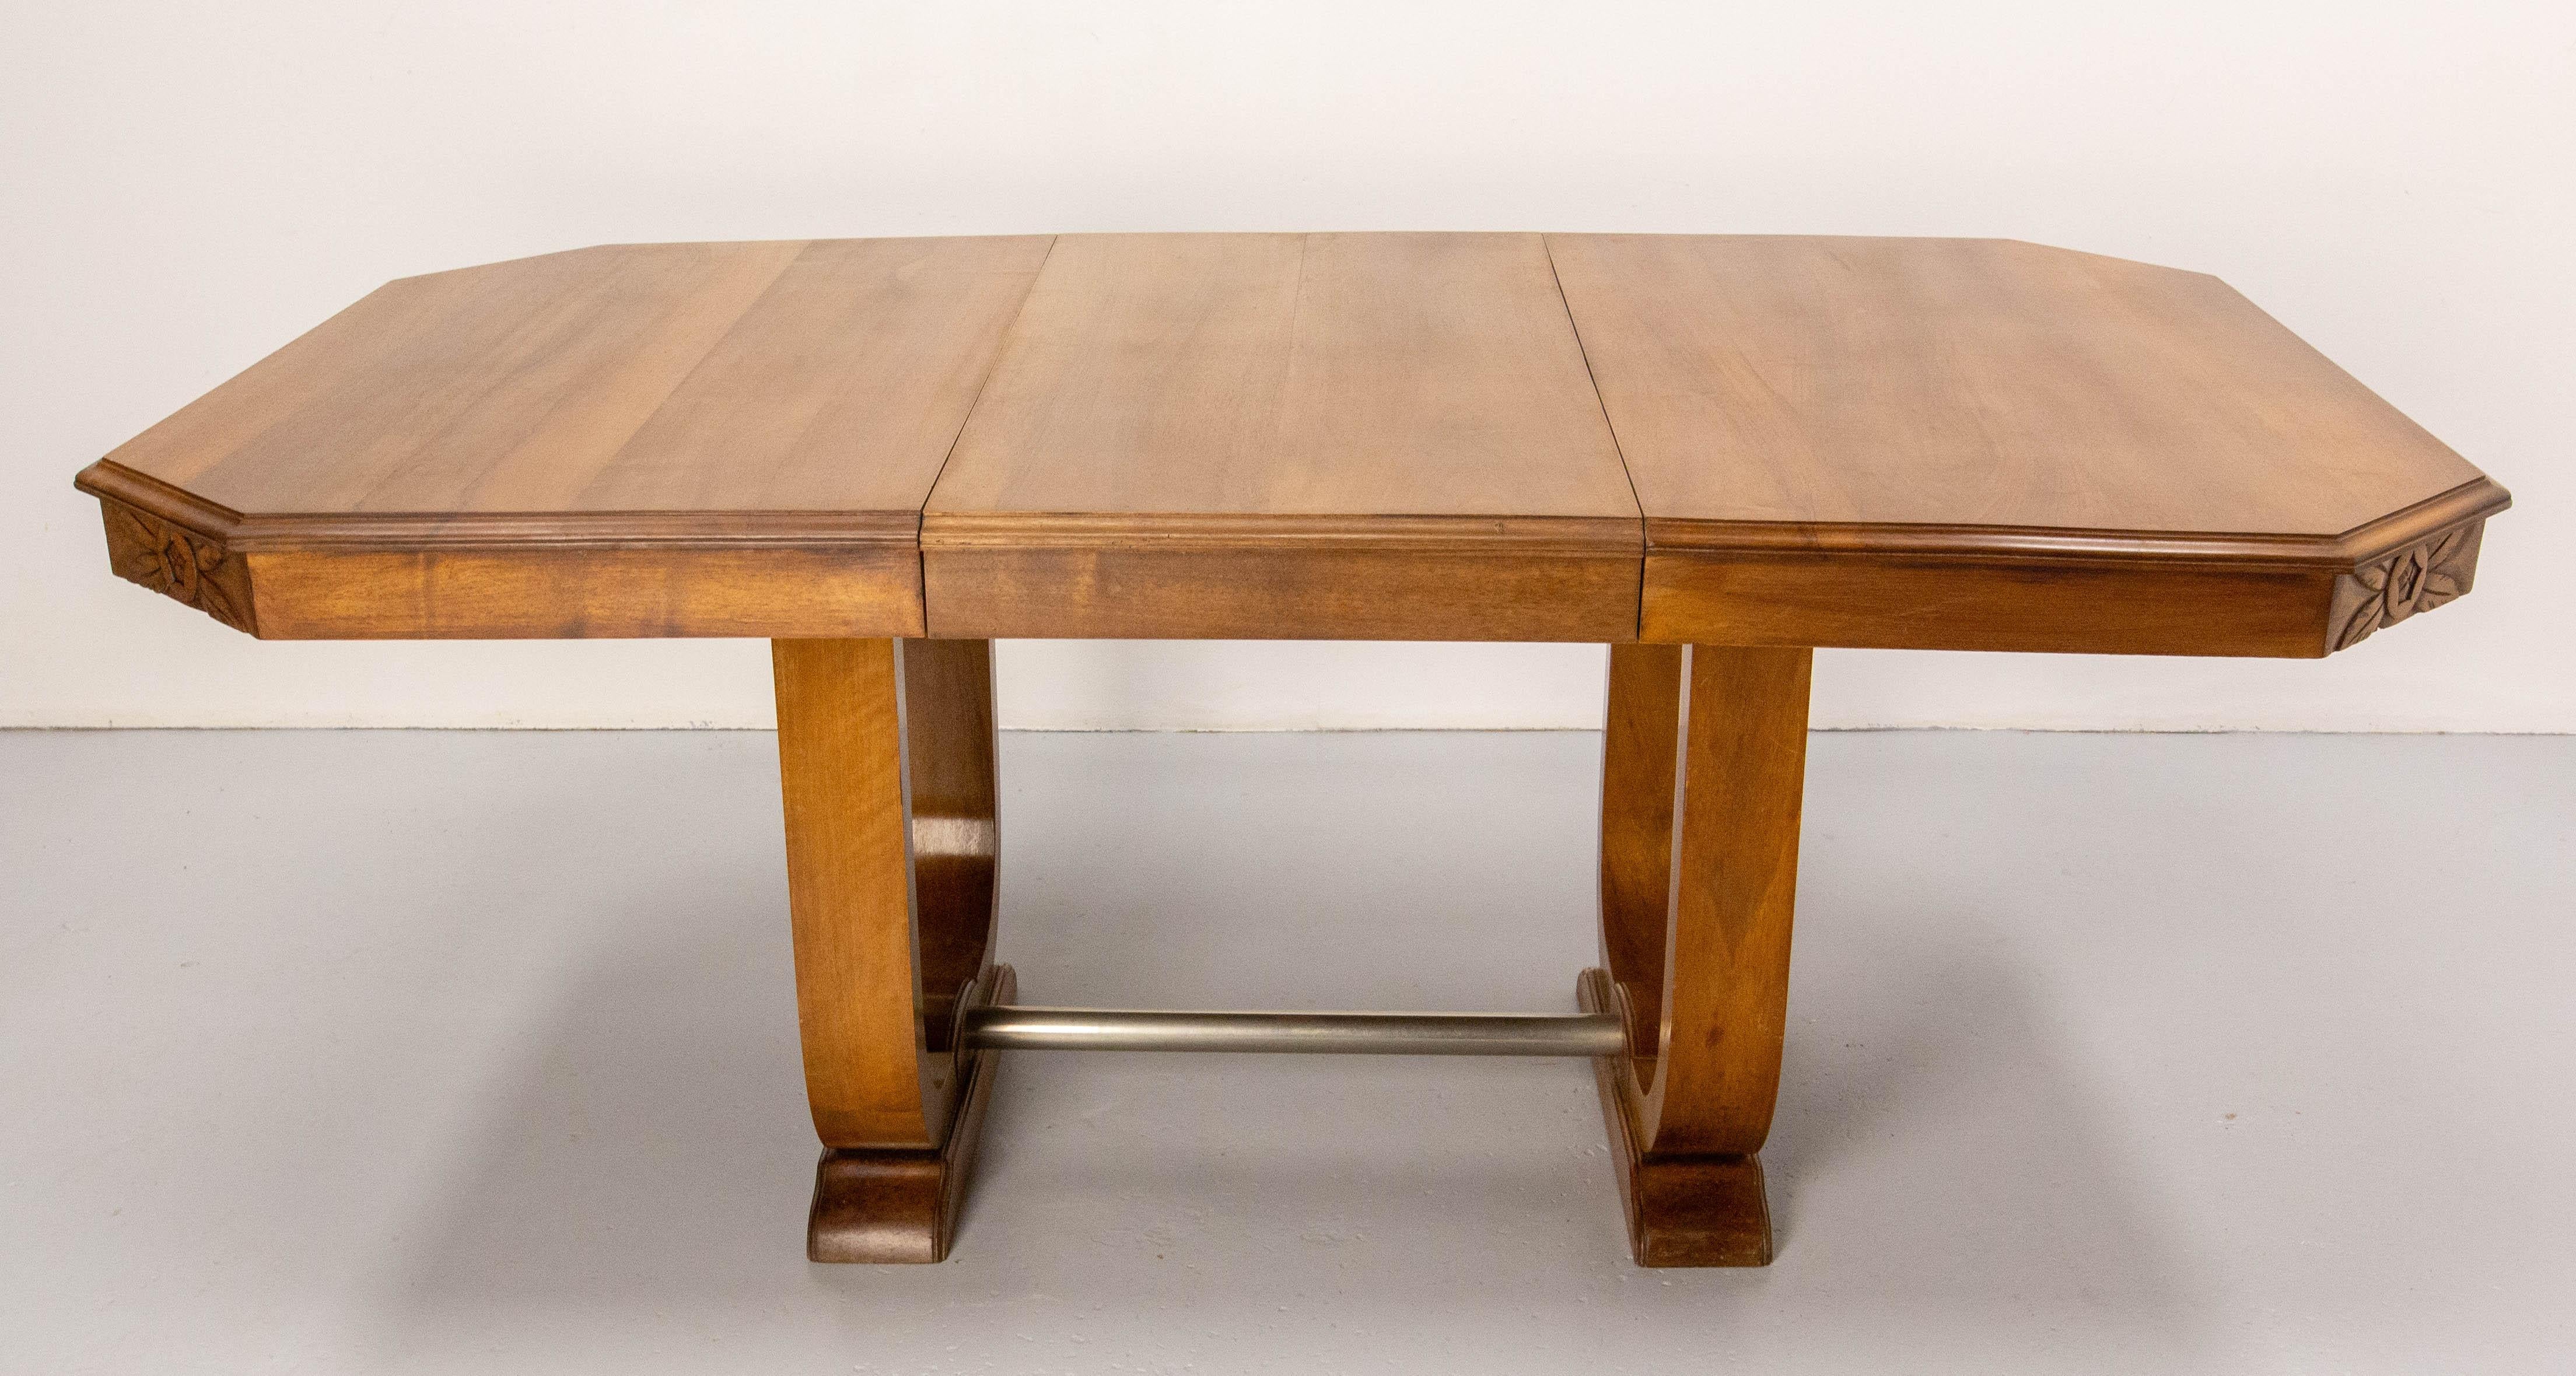 Dining table Art Deco, made circa 1930.
The extension were made recently by our cabinet maker using the walnut wood of another table. 
The finishing of the top and the belt of the table have been redone.
Width of the table when the extension is